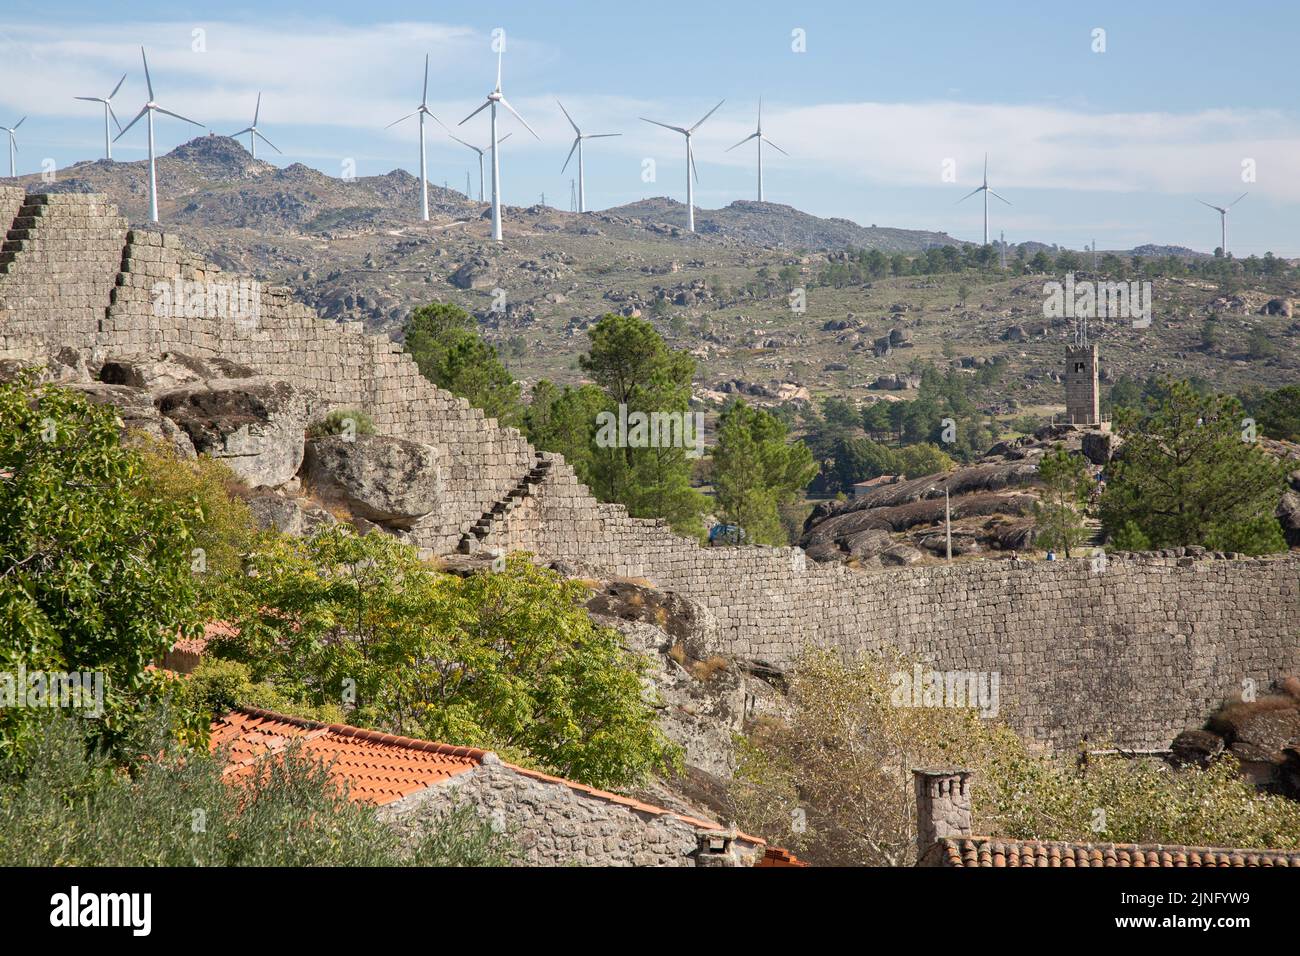 View with Wind Turbines and Village, Sortelha; Portugal Stock Photo